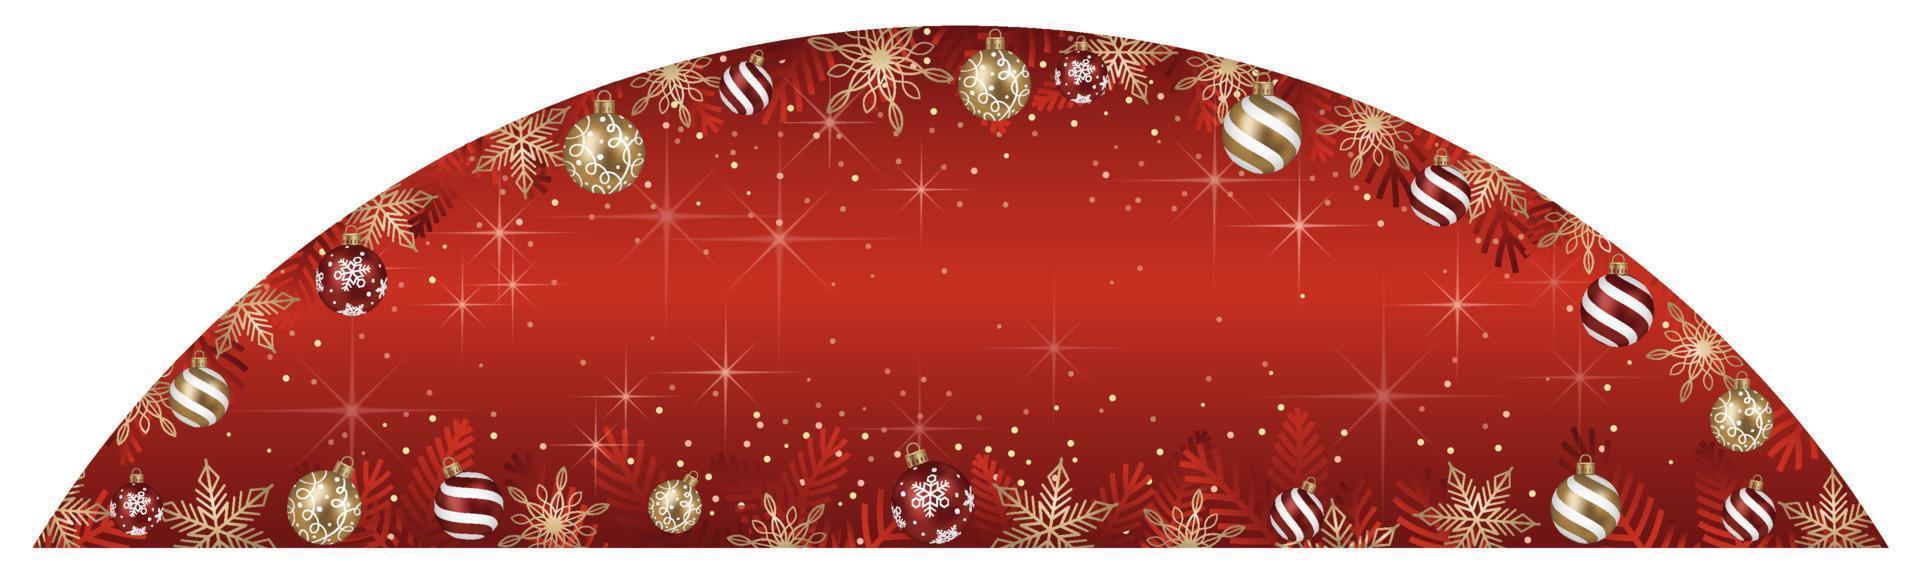 Abstract Vector Arch Frame Illustration With Christmas Balls And Luminous Red Background Isolated On A White Background.